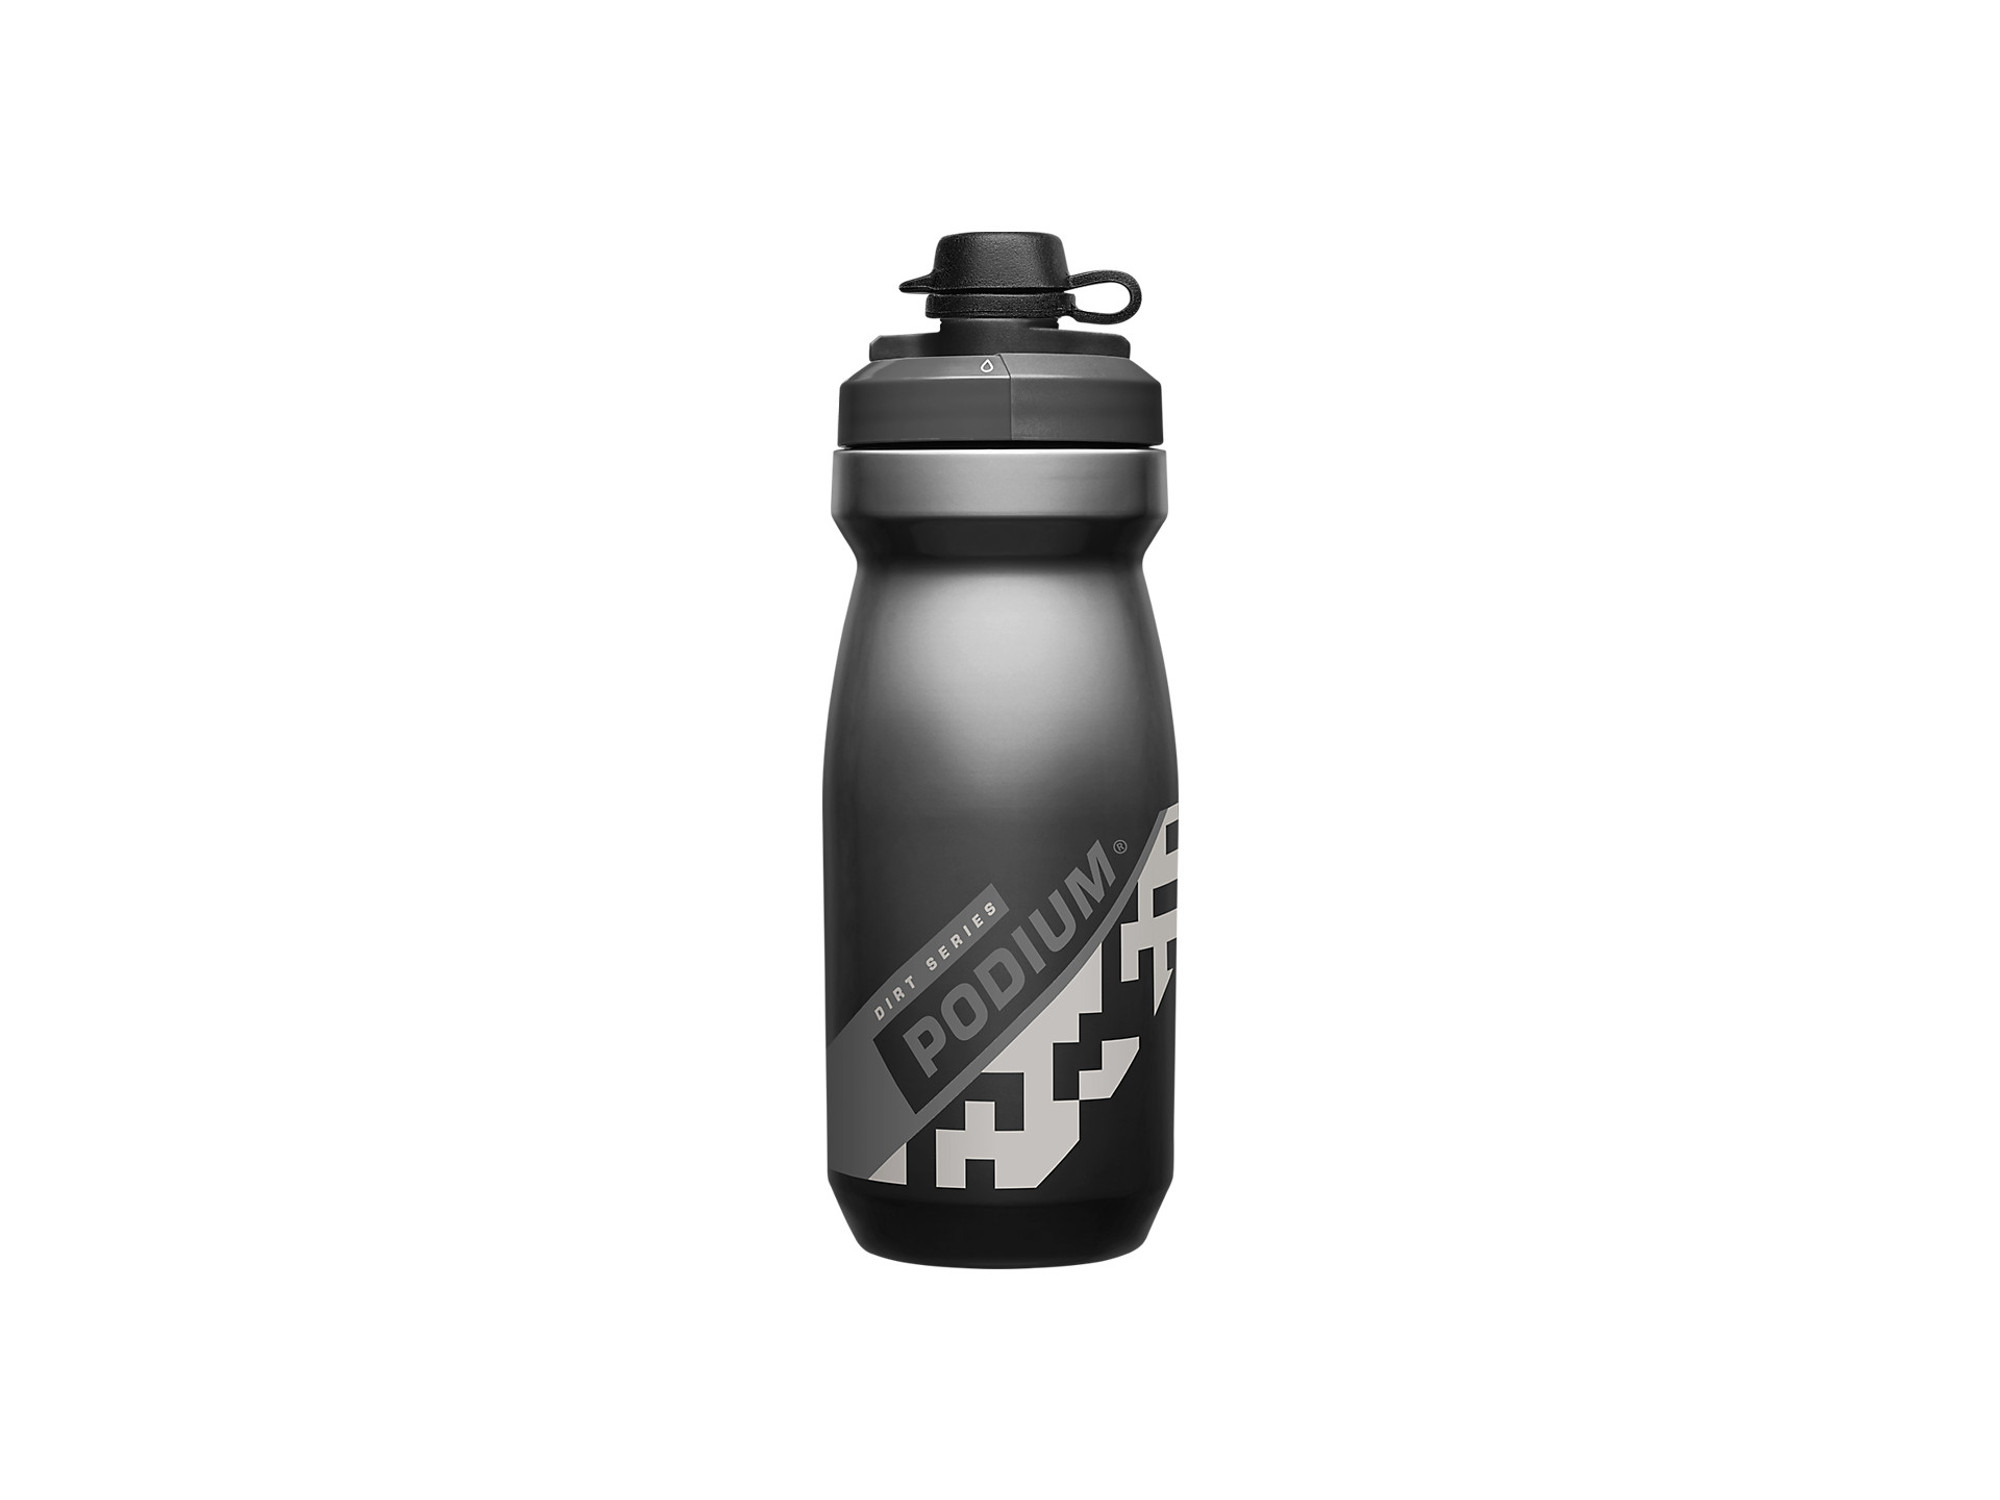 https://cdn11.bigcommerce.com/s-8p220y2h7i/images/stencil/2000x2000/products/57097/42354/CamelbakPodiumDirtSeriesBottle_33424_A_Primary__43983.1658761758.jpg?c=2